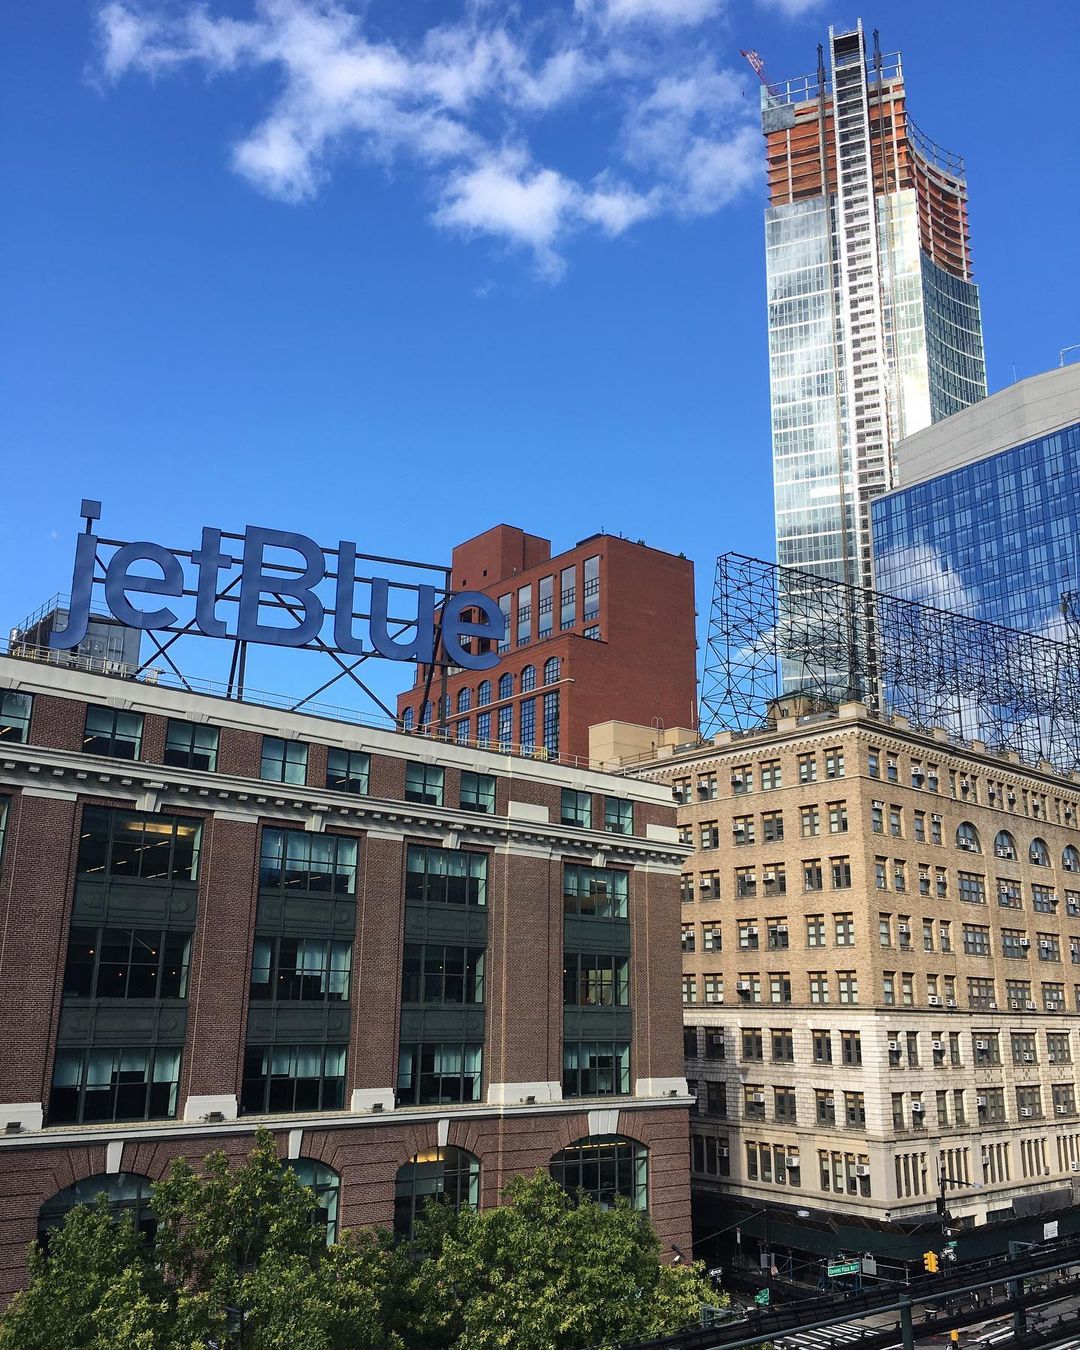 Jet Blue Headquarters sign in Queens Plaza photo by Instagram user @mgamarritas